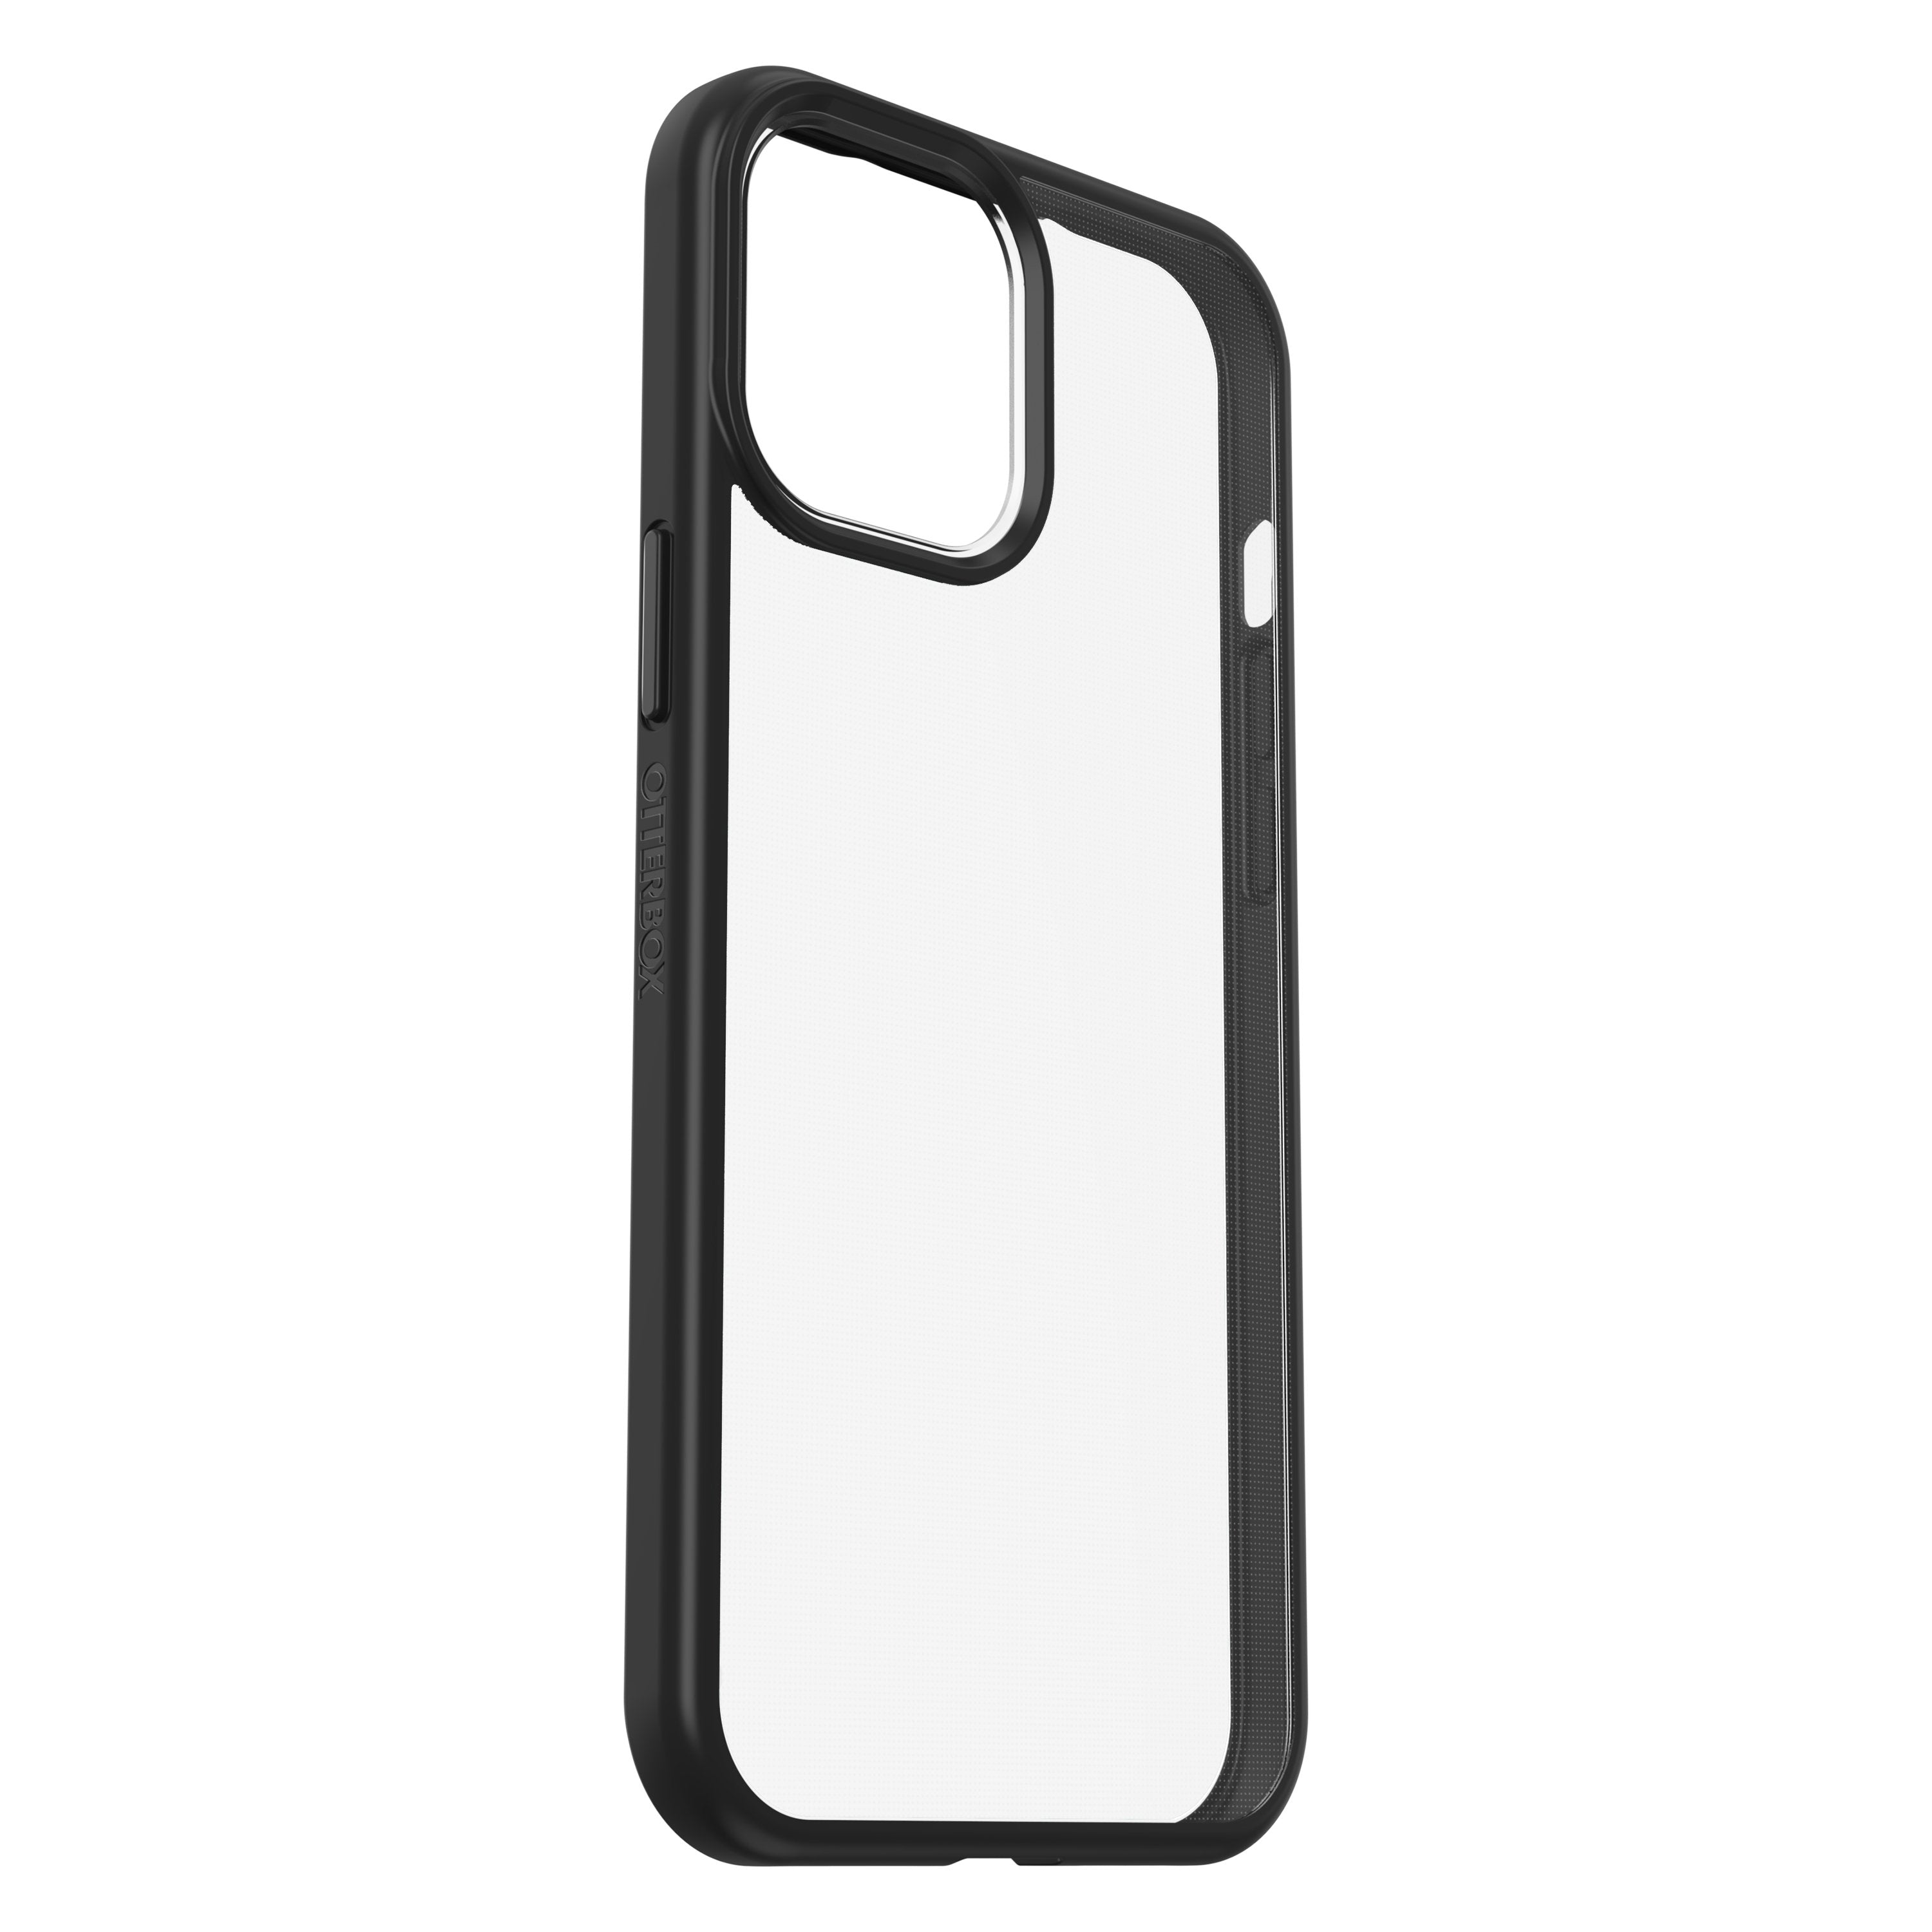 OtterBox Apple iPhone 12 Pro Max React Clear case - Ultra-Slim and Lightweight Cover w/ Military Grade Drop Protection, Wireless Charging Compatible - Clear w/ Black Frame